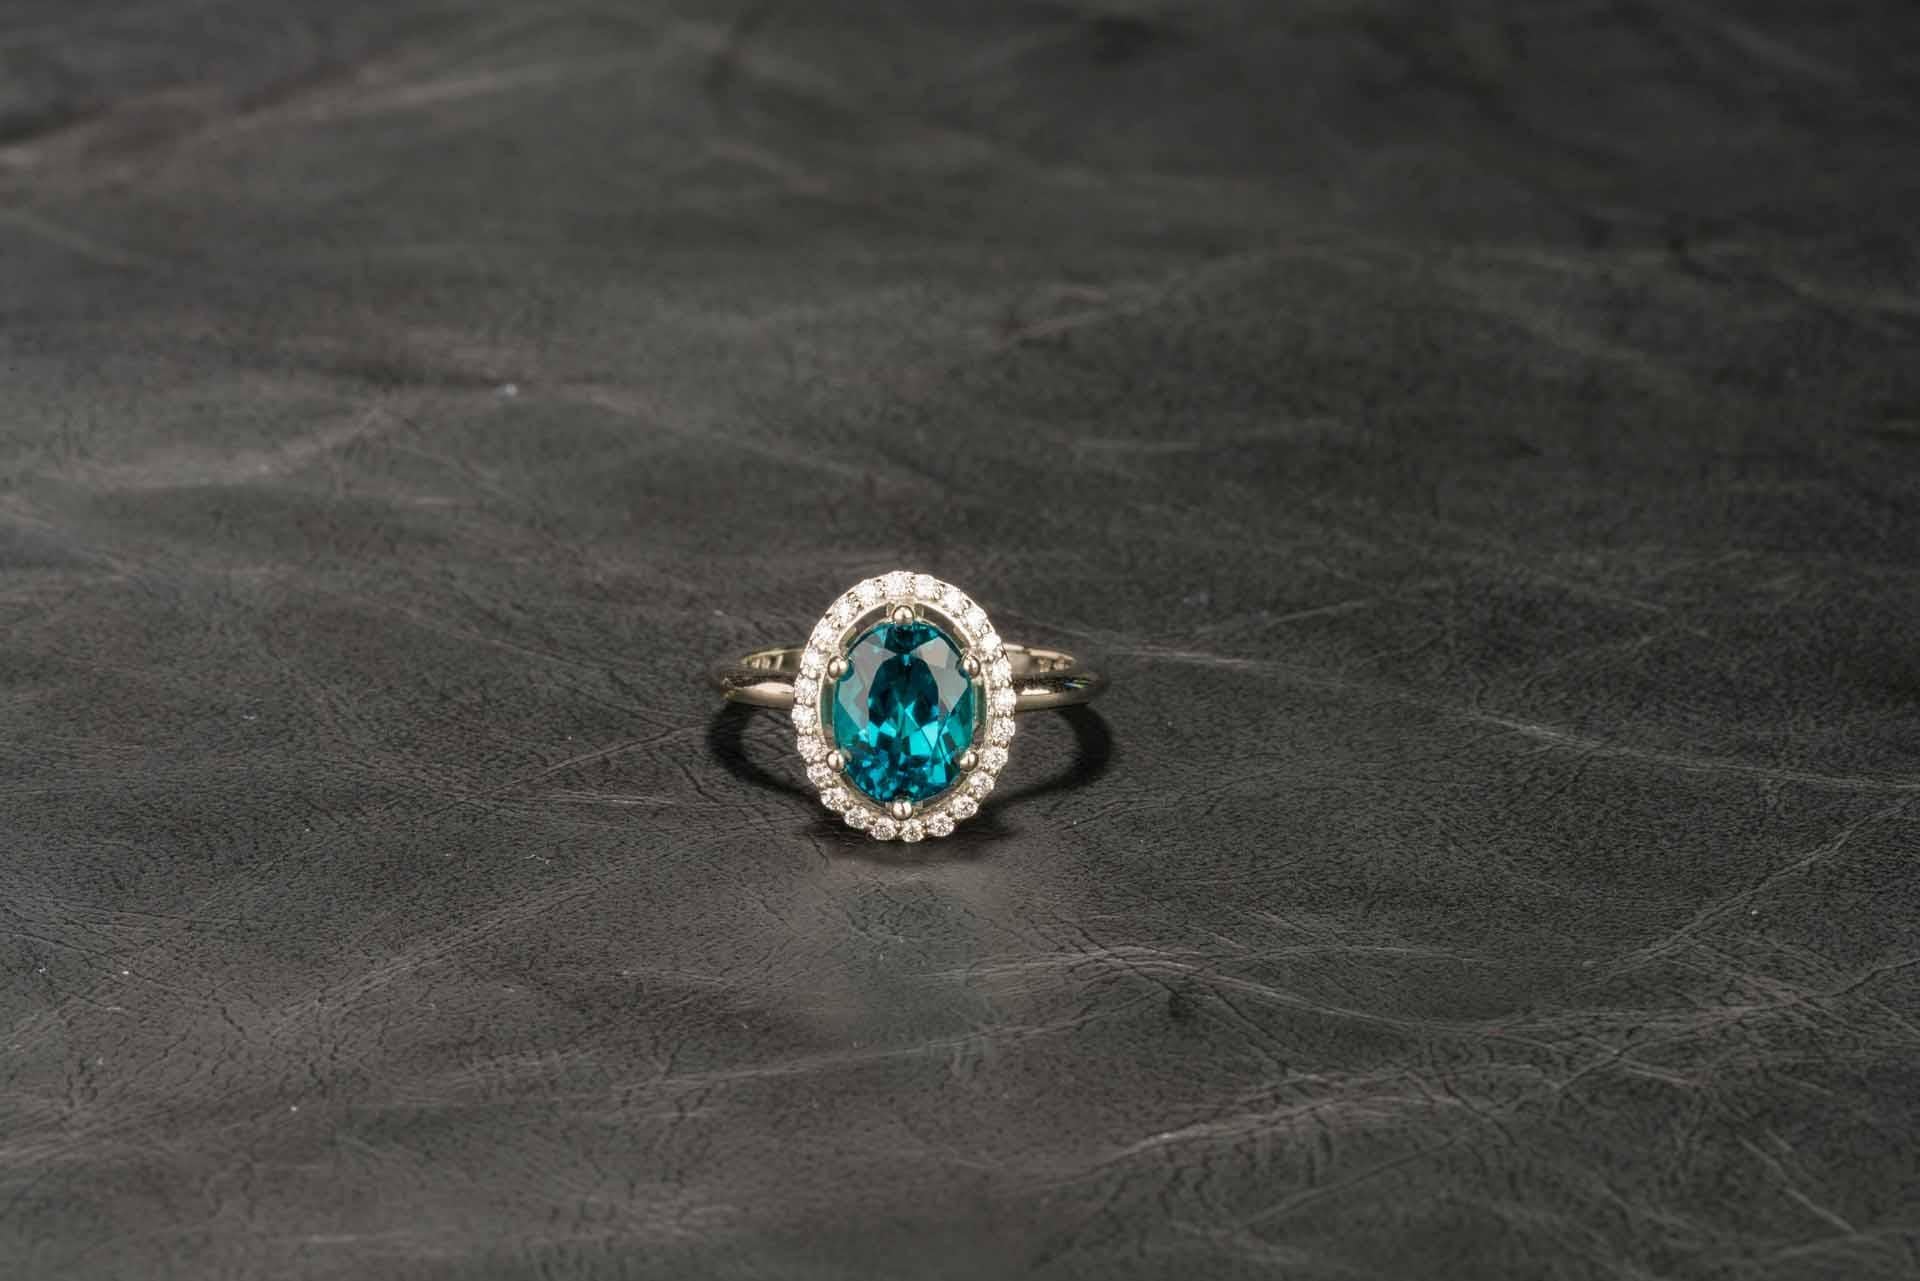 An 18k white gold ring set with a 2.47 carat Brazilian indicolite tourmaline with a halo of 0.24 total carat weight round full cut white diamonds, F color, VS clarity, ring size 6.75. Designed and made by llyn strong.